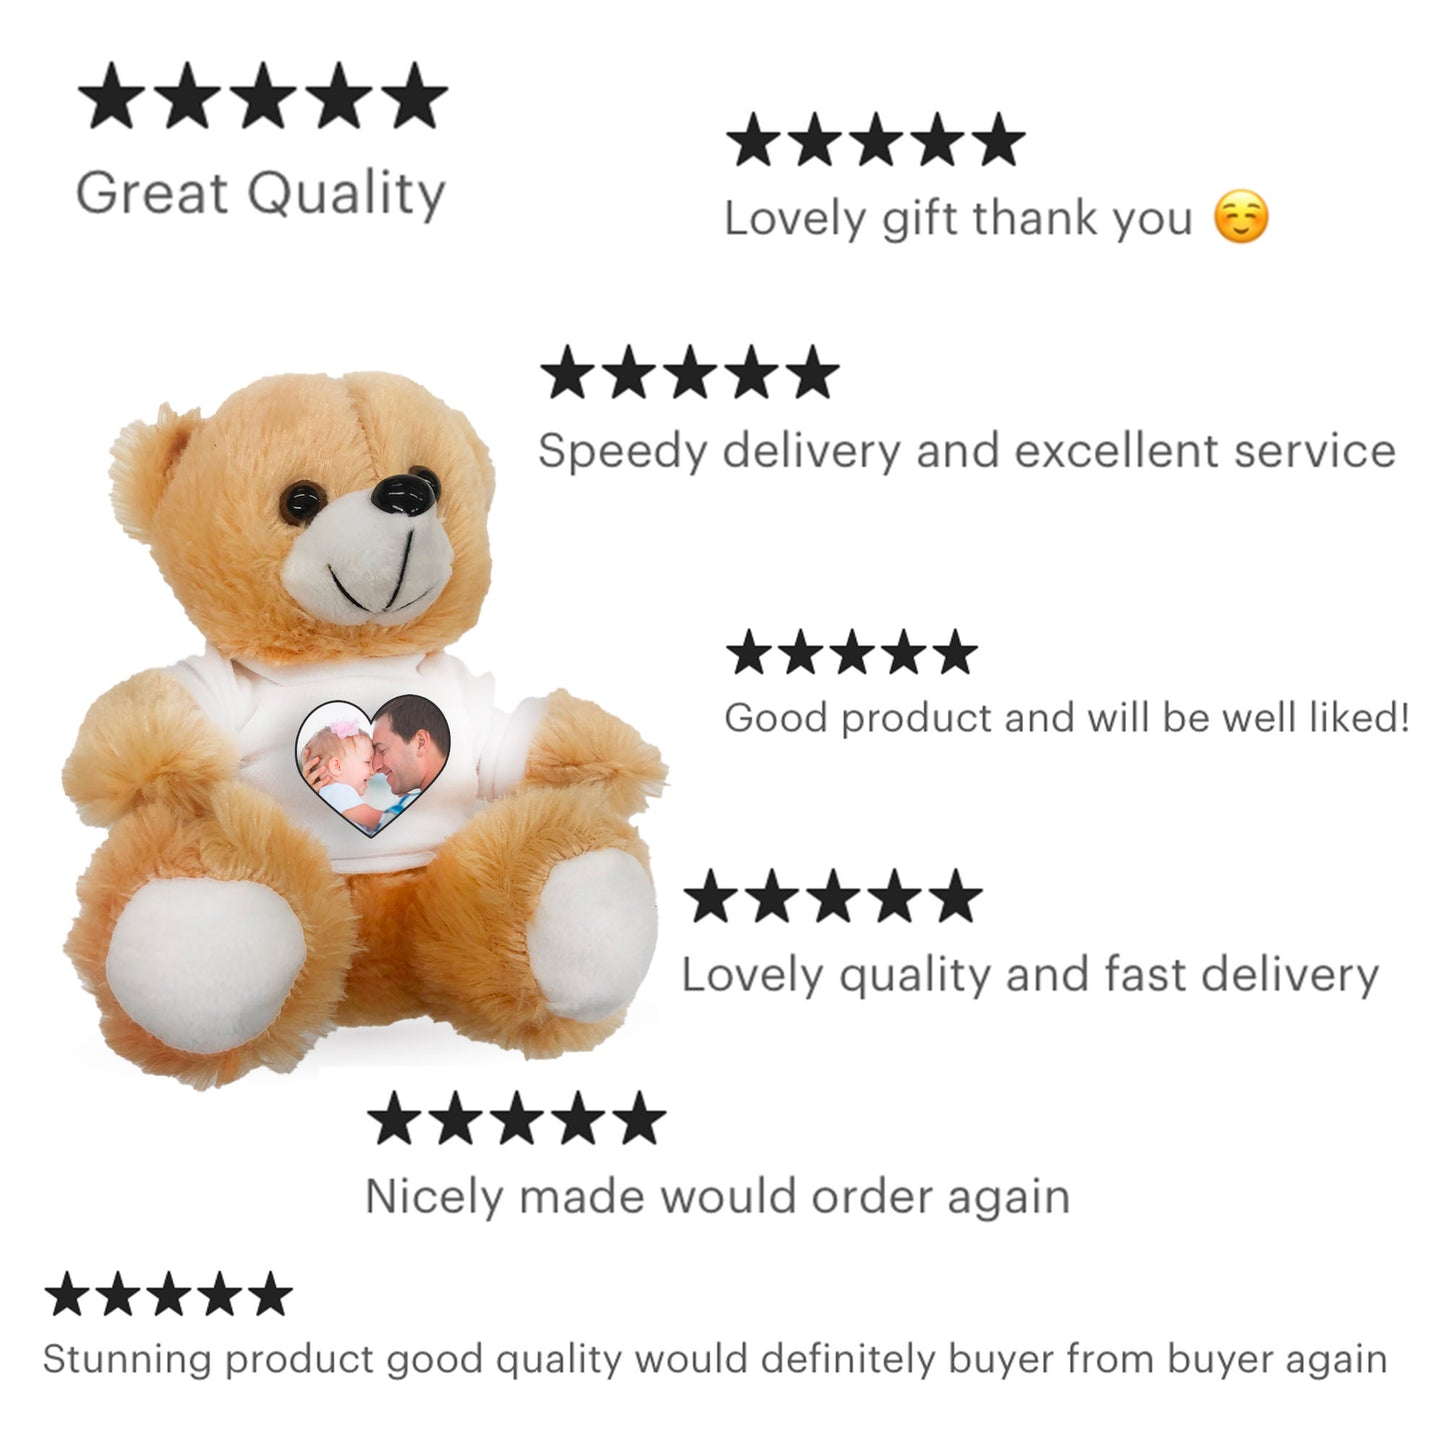 Custom Personalised Teddy Bears our teddy bears make excellent gifts for all ages